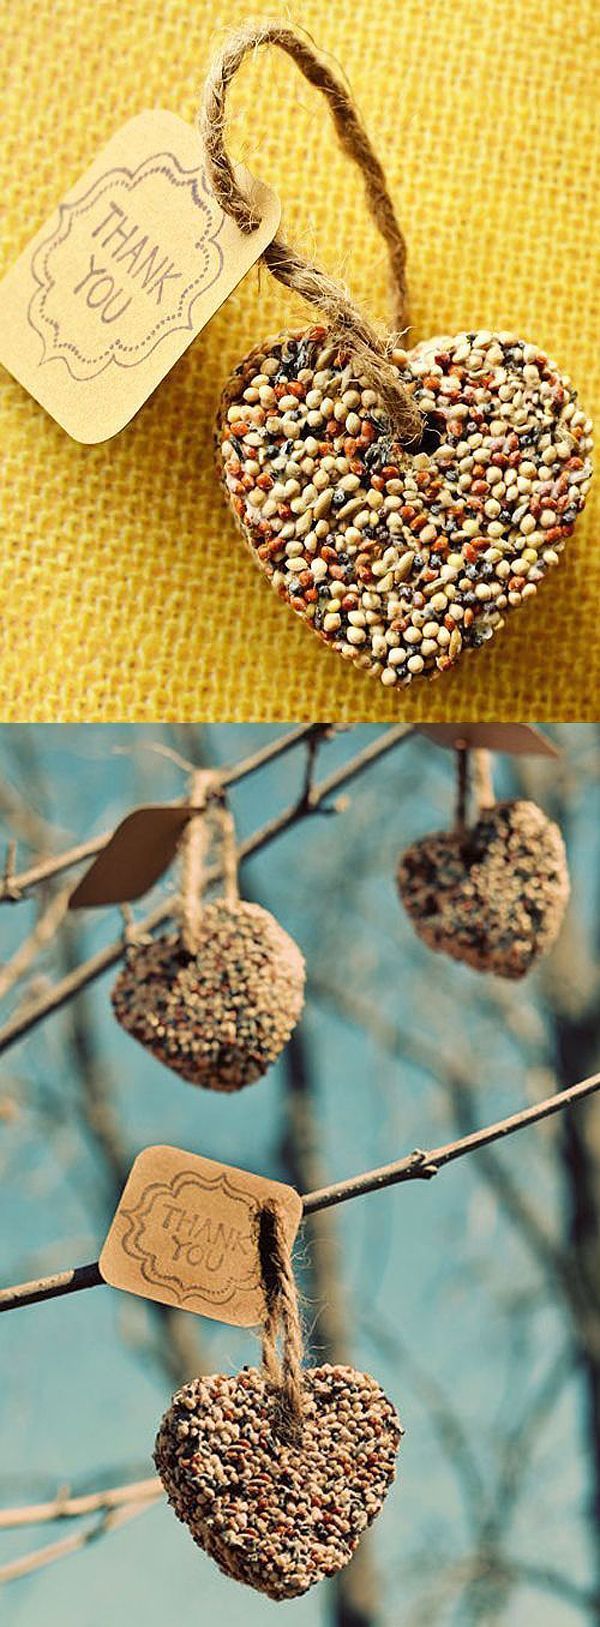 7 eco friendly wedding favours -   14 wedding Small thoughts ideas